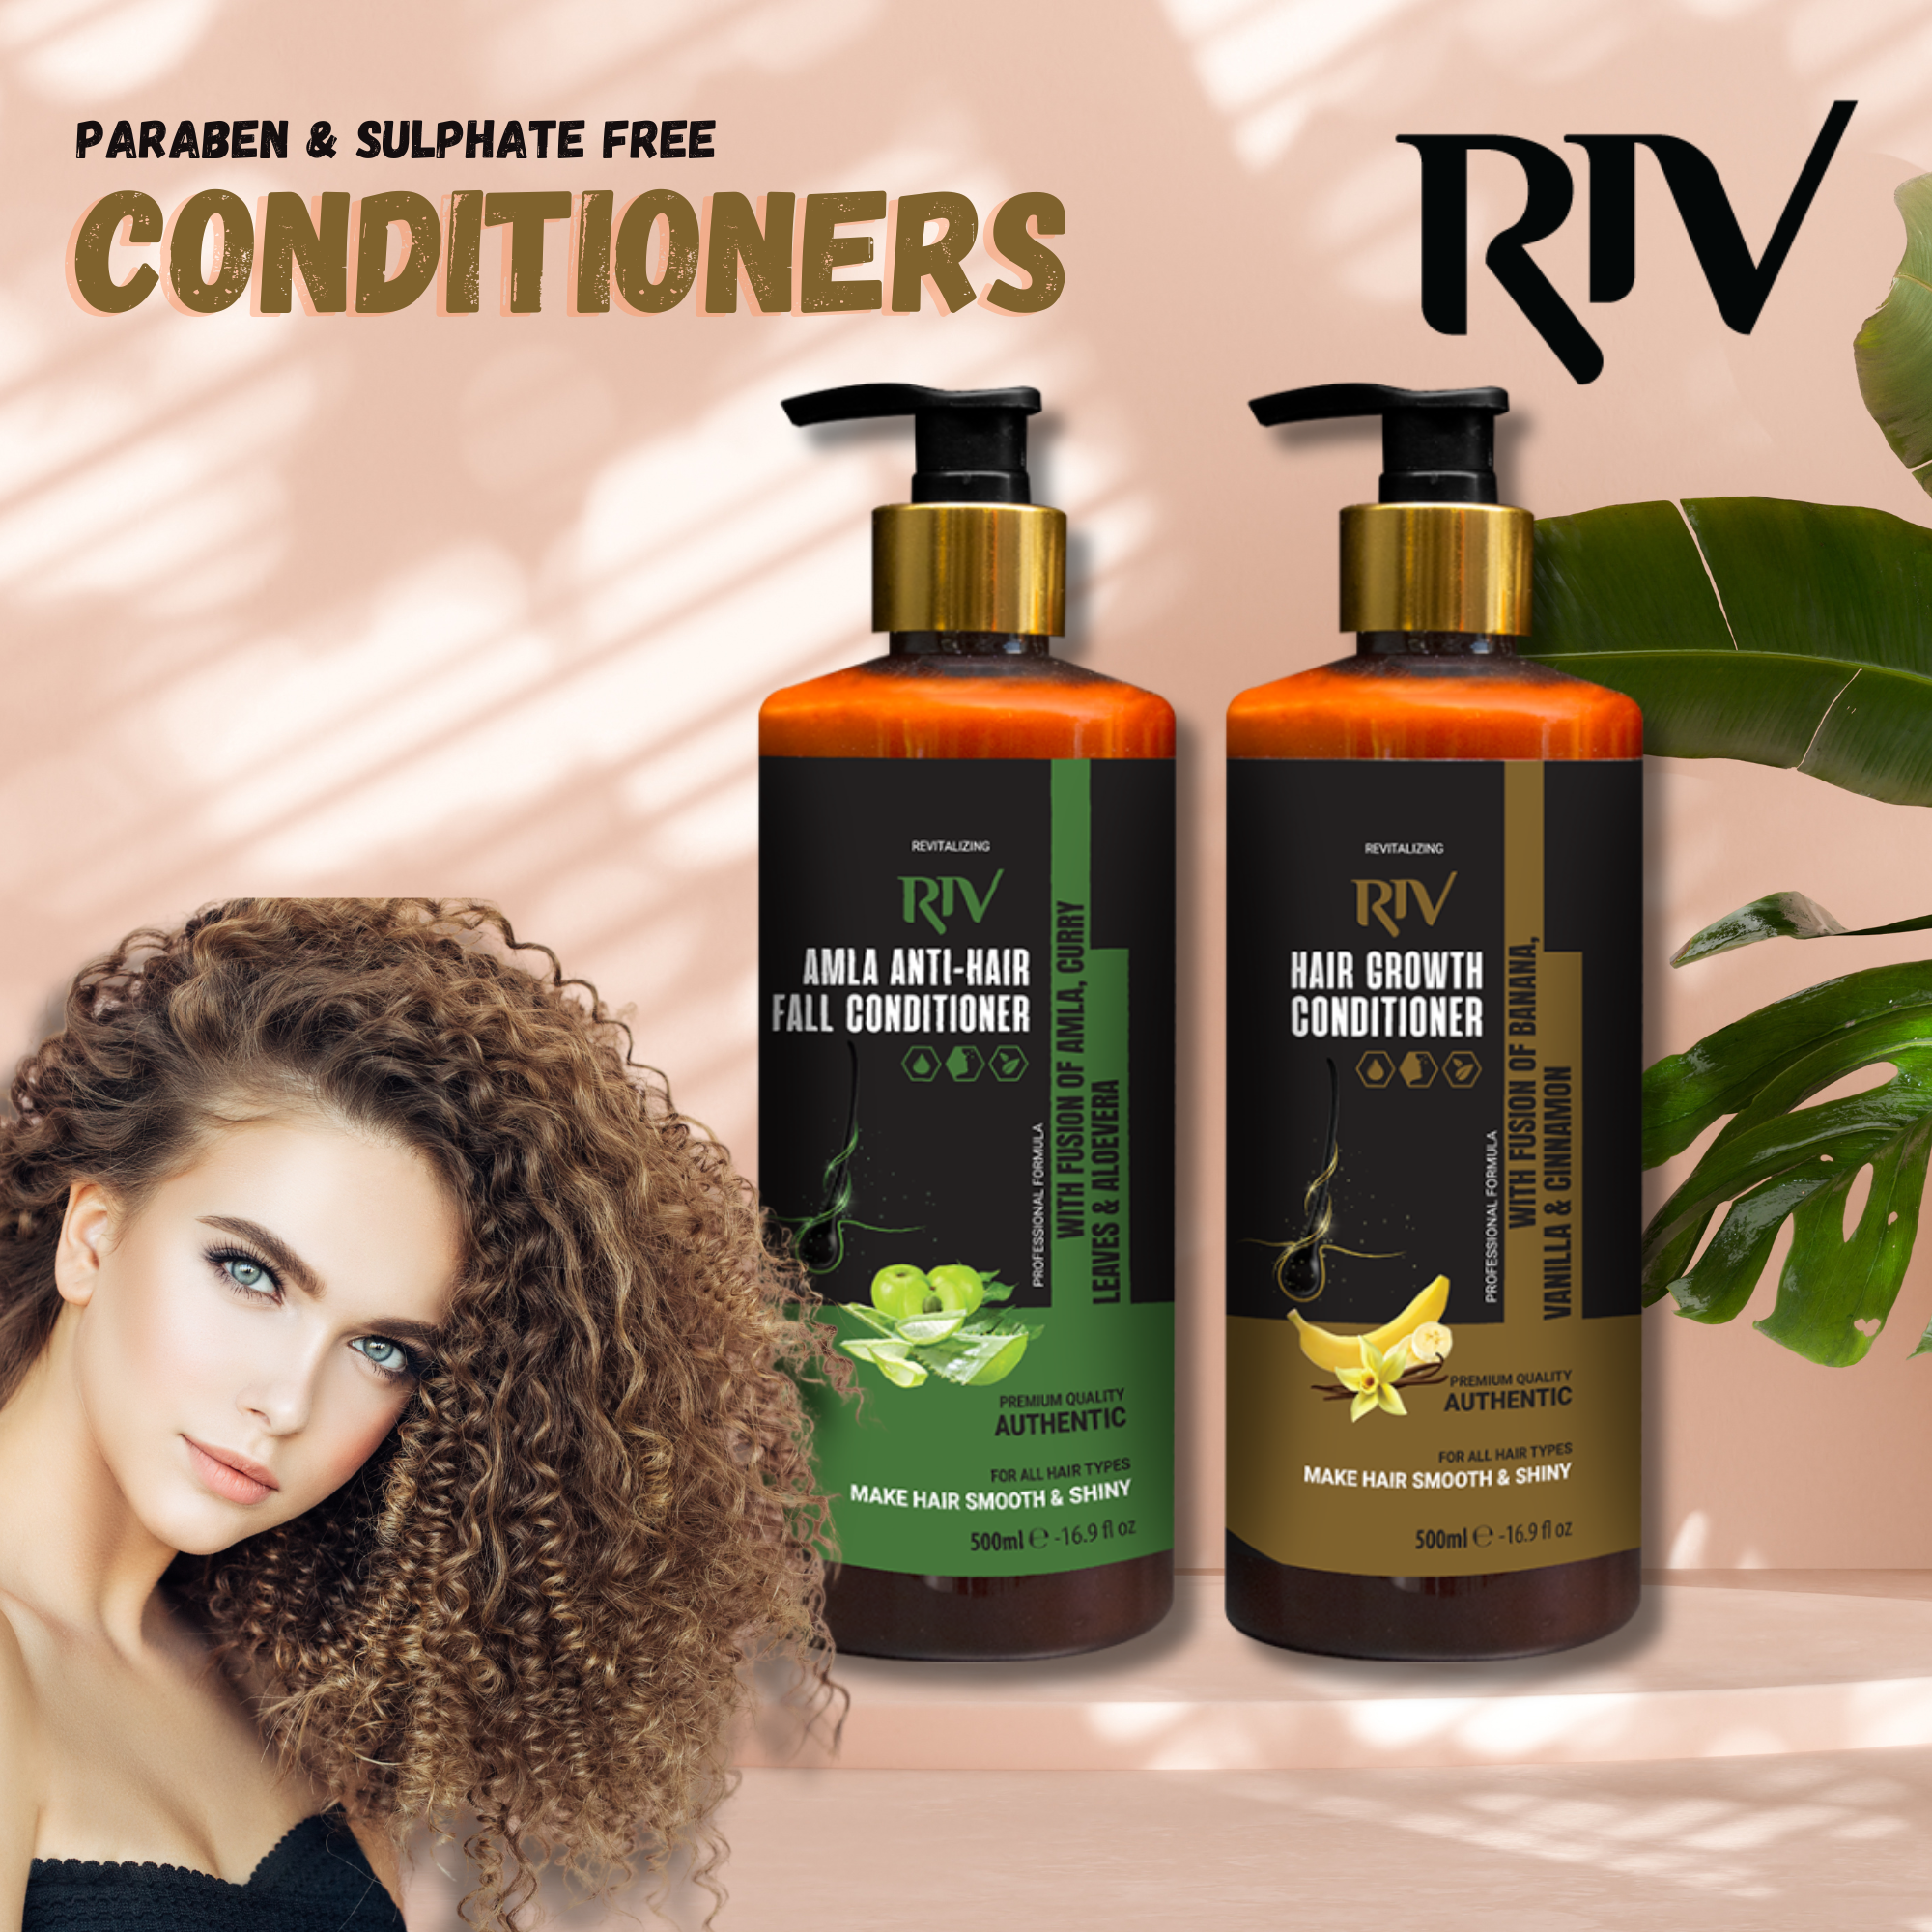 RIV Conditioners Banner